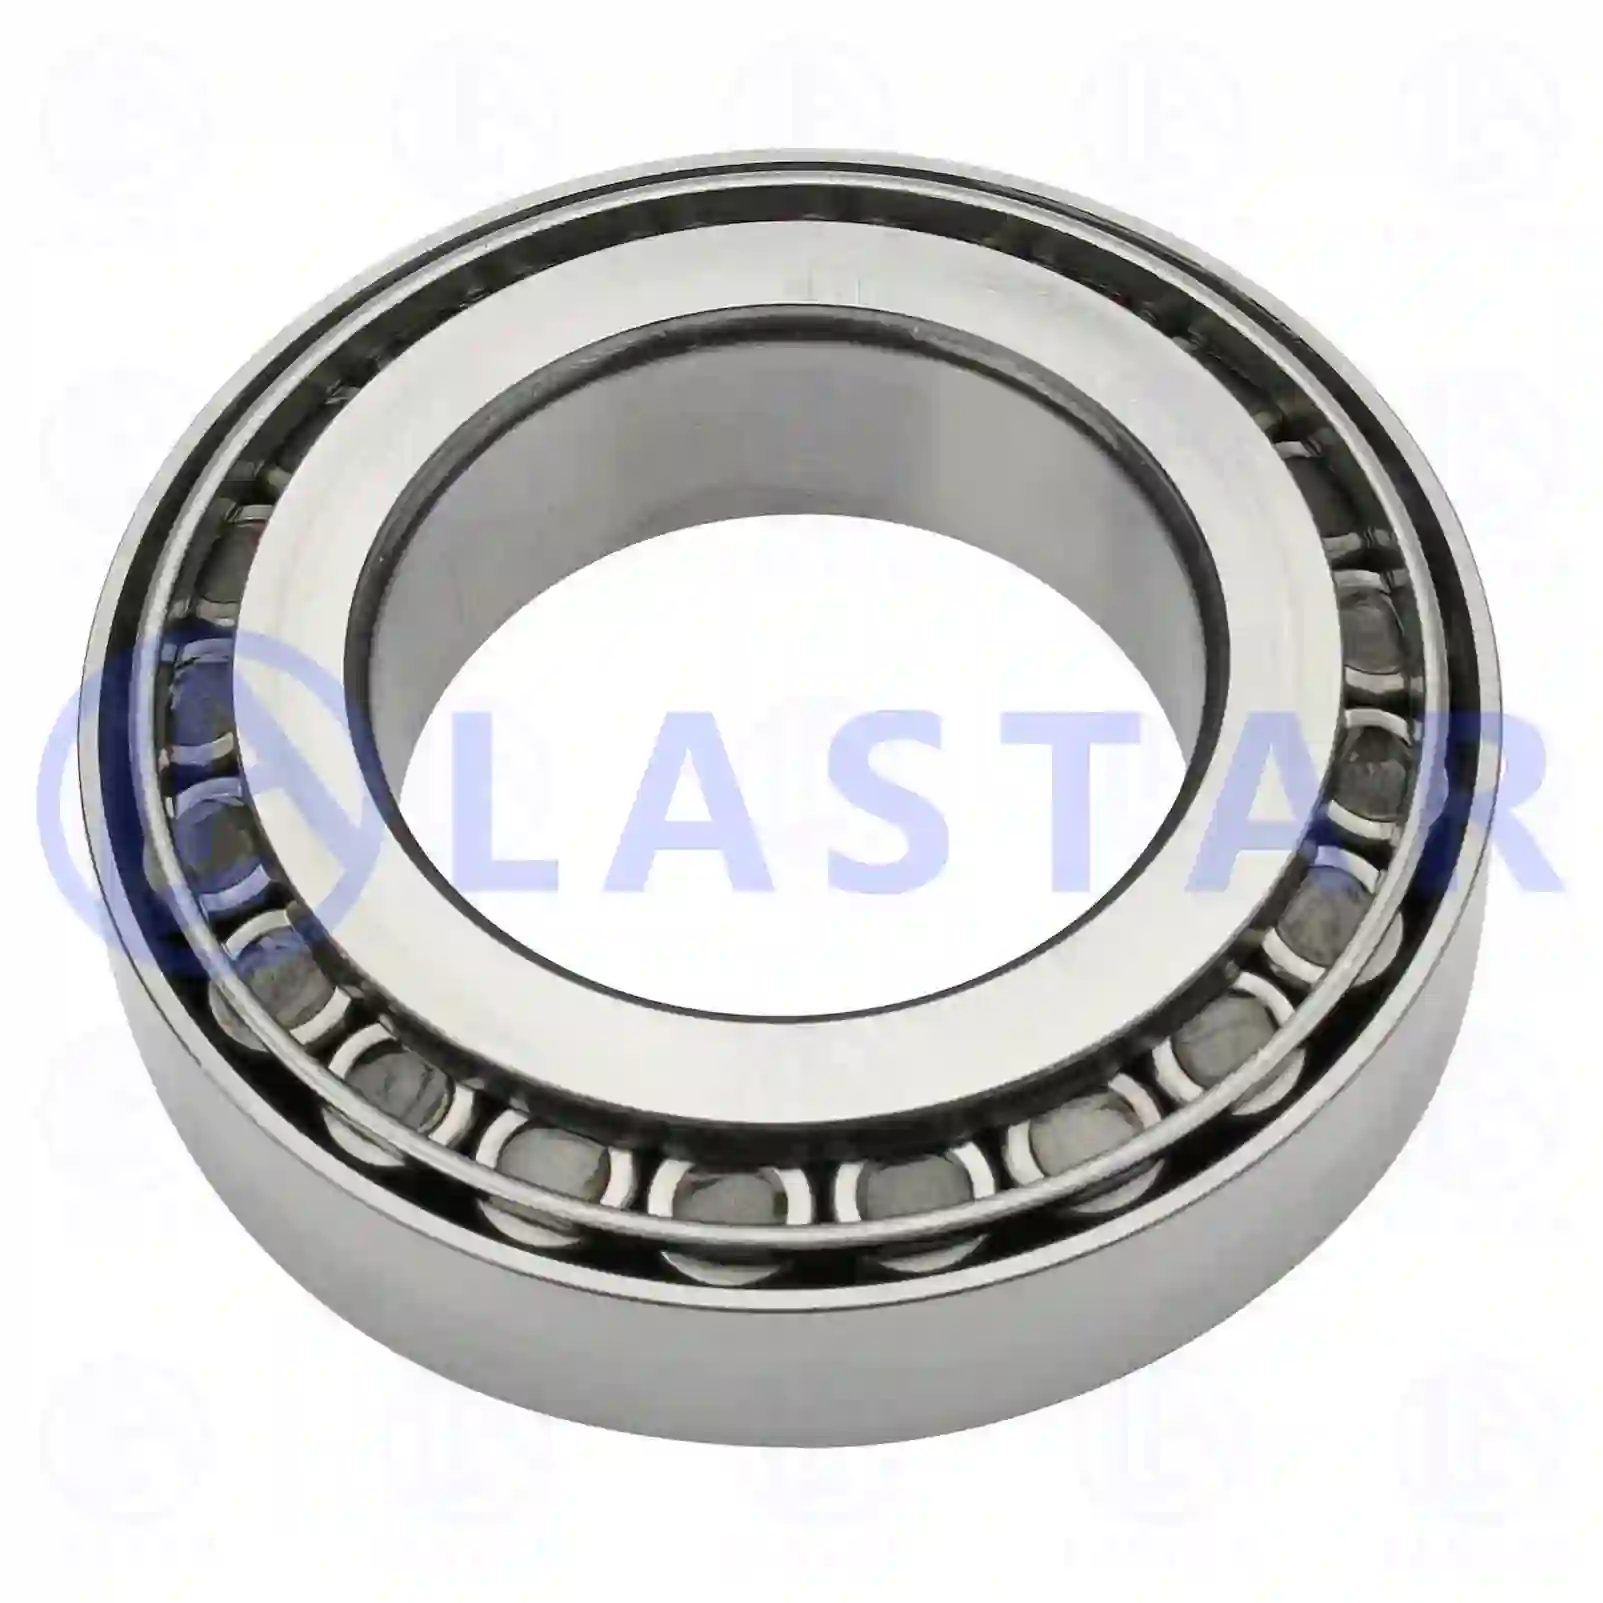 Tapered roller bearing, 77725217, 000337133, 01103771, 94036574, 94057672, 94060942, 988475101, 988475101A, 1-09812044-0, 1-09812053-0, 1-09812153-0, 1-09812154-0, 1-09812168-0, 1-09812244-0, 9-00093161-0, 01103771, 1103771, 26800210, 06324901400, 06324990005, 06324990200, 81934206096, 87523301010, A0023432215, A0773221500, 996032215, 0009817405, 0009818405, 0019814805, 3279810305, 9429810205, MH043001, 01014-10584, 0023432215, 0773221500, 0959232215, 5000588934, 14102, 177893, 97699-32215, 11066, 2V5609747Q ||  77725217 Lastar Spare Part | Truck Spare Parts, Auotomotive Spare Parts Tapered roller bearing, 77725217, 000337133, 01103771, 94036574, 94057672, 94060942, 988475101, 988475101A, 1-09812044-0, 1-09812053-0, 1-09812153-0, 1-09812154-0, 1-09812168-0, 1-09812244-0, 9-00093161-0, 01103771, 1103771, 26800210, 06324901400, 06324990005, 06324990200, 81934206096, 87523301010, A0023432215, A0773221500, 996032215, 0009817405, 0009818405, 0019814805, 3279810305, 9429810205, MH043001, 01014-10584, 0023432215, 0773221500, 0959232215, 5000588934, 14102, 177893, 97699-32215, 11066, 2V5609747Q ||  77725217 Lastar Spare Part | Truck Spare Parts, Auotomotive Spare Parts